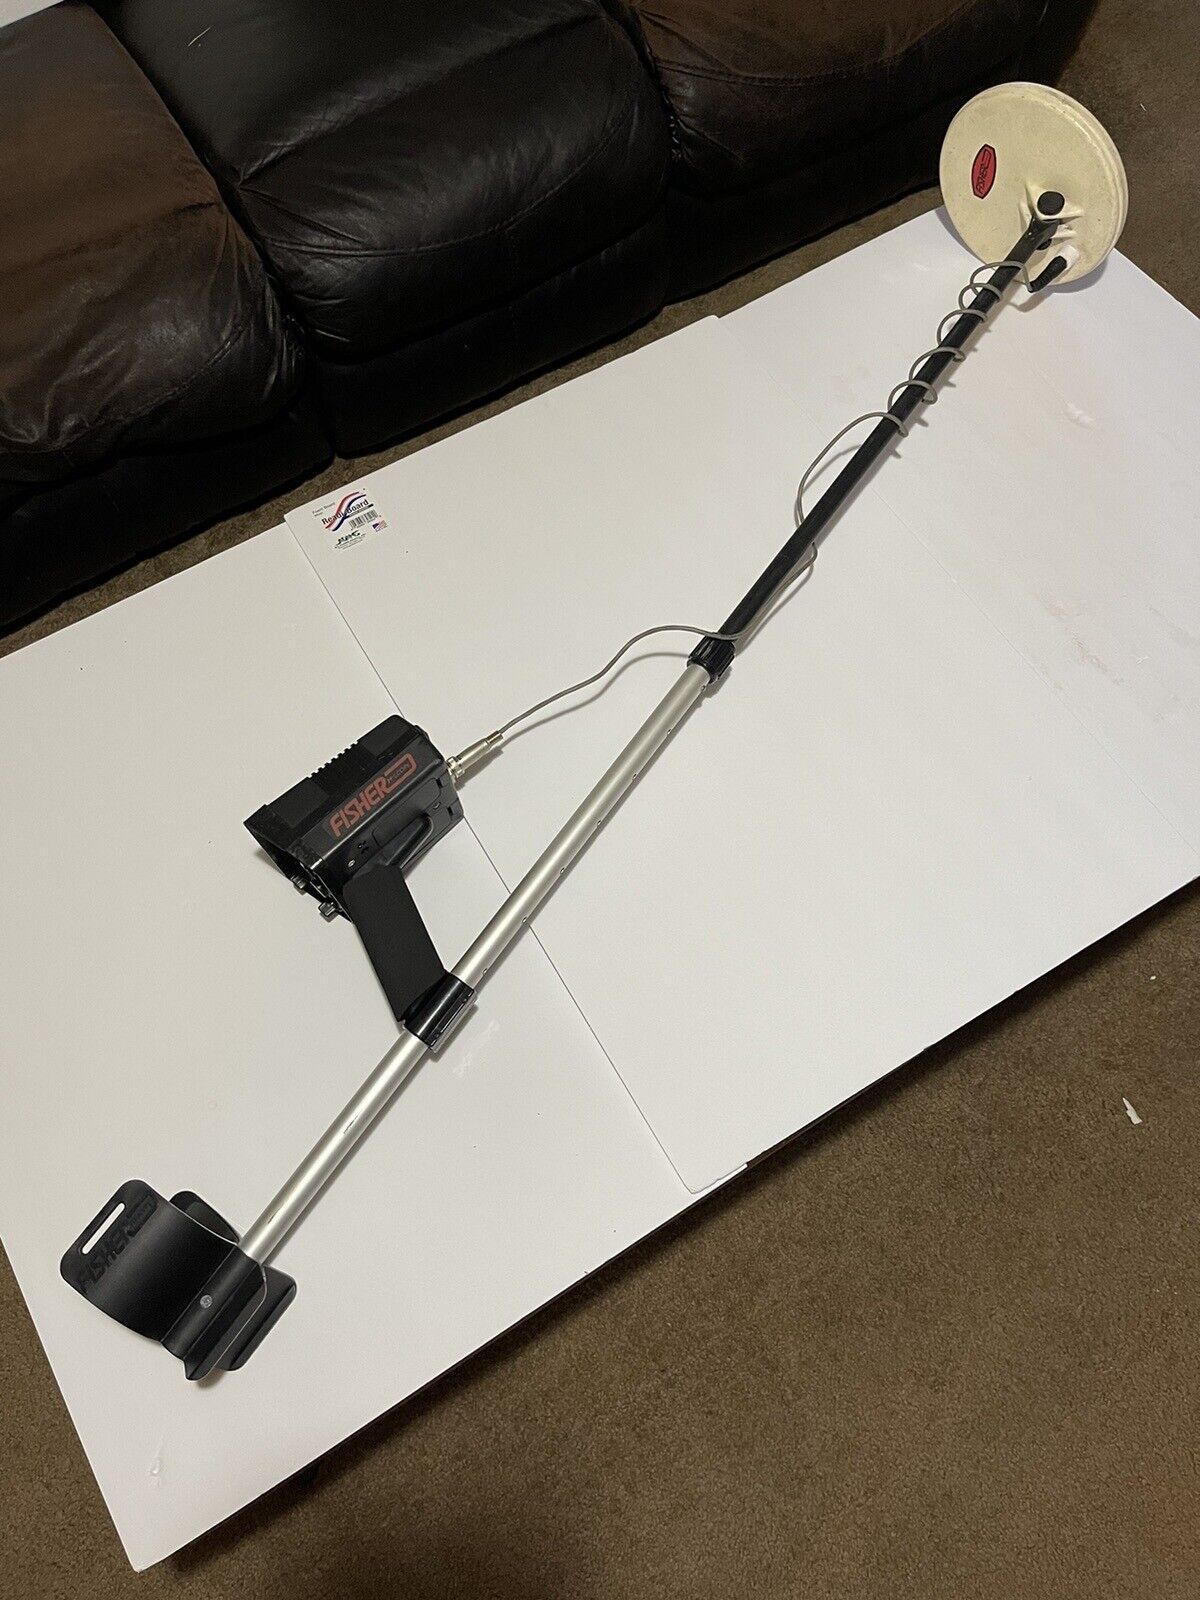 Fisher Labs Metal Detector Adjustable m-scope M-97-8 W/case And Batteries Works